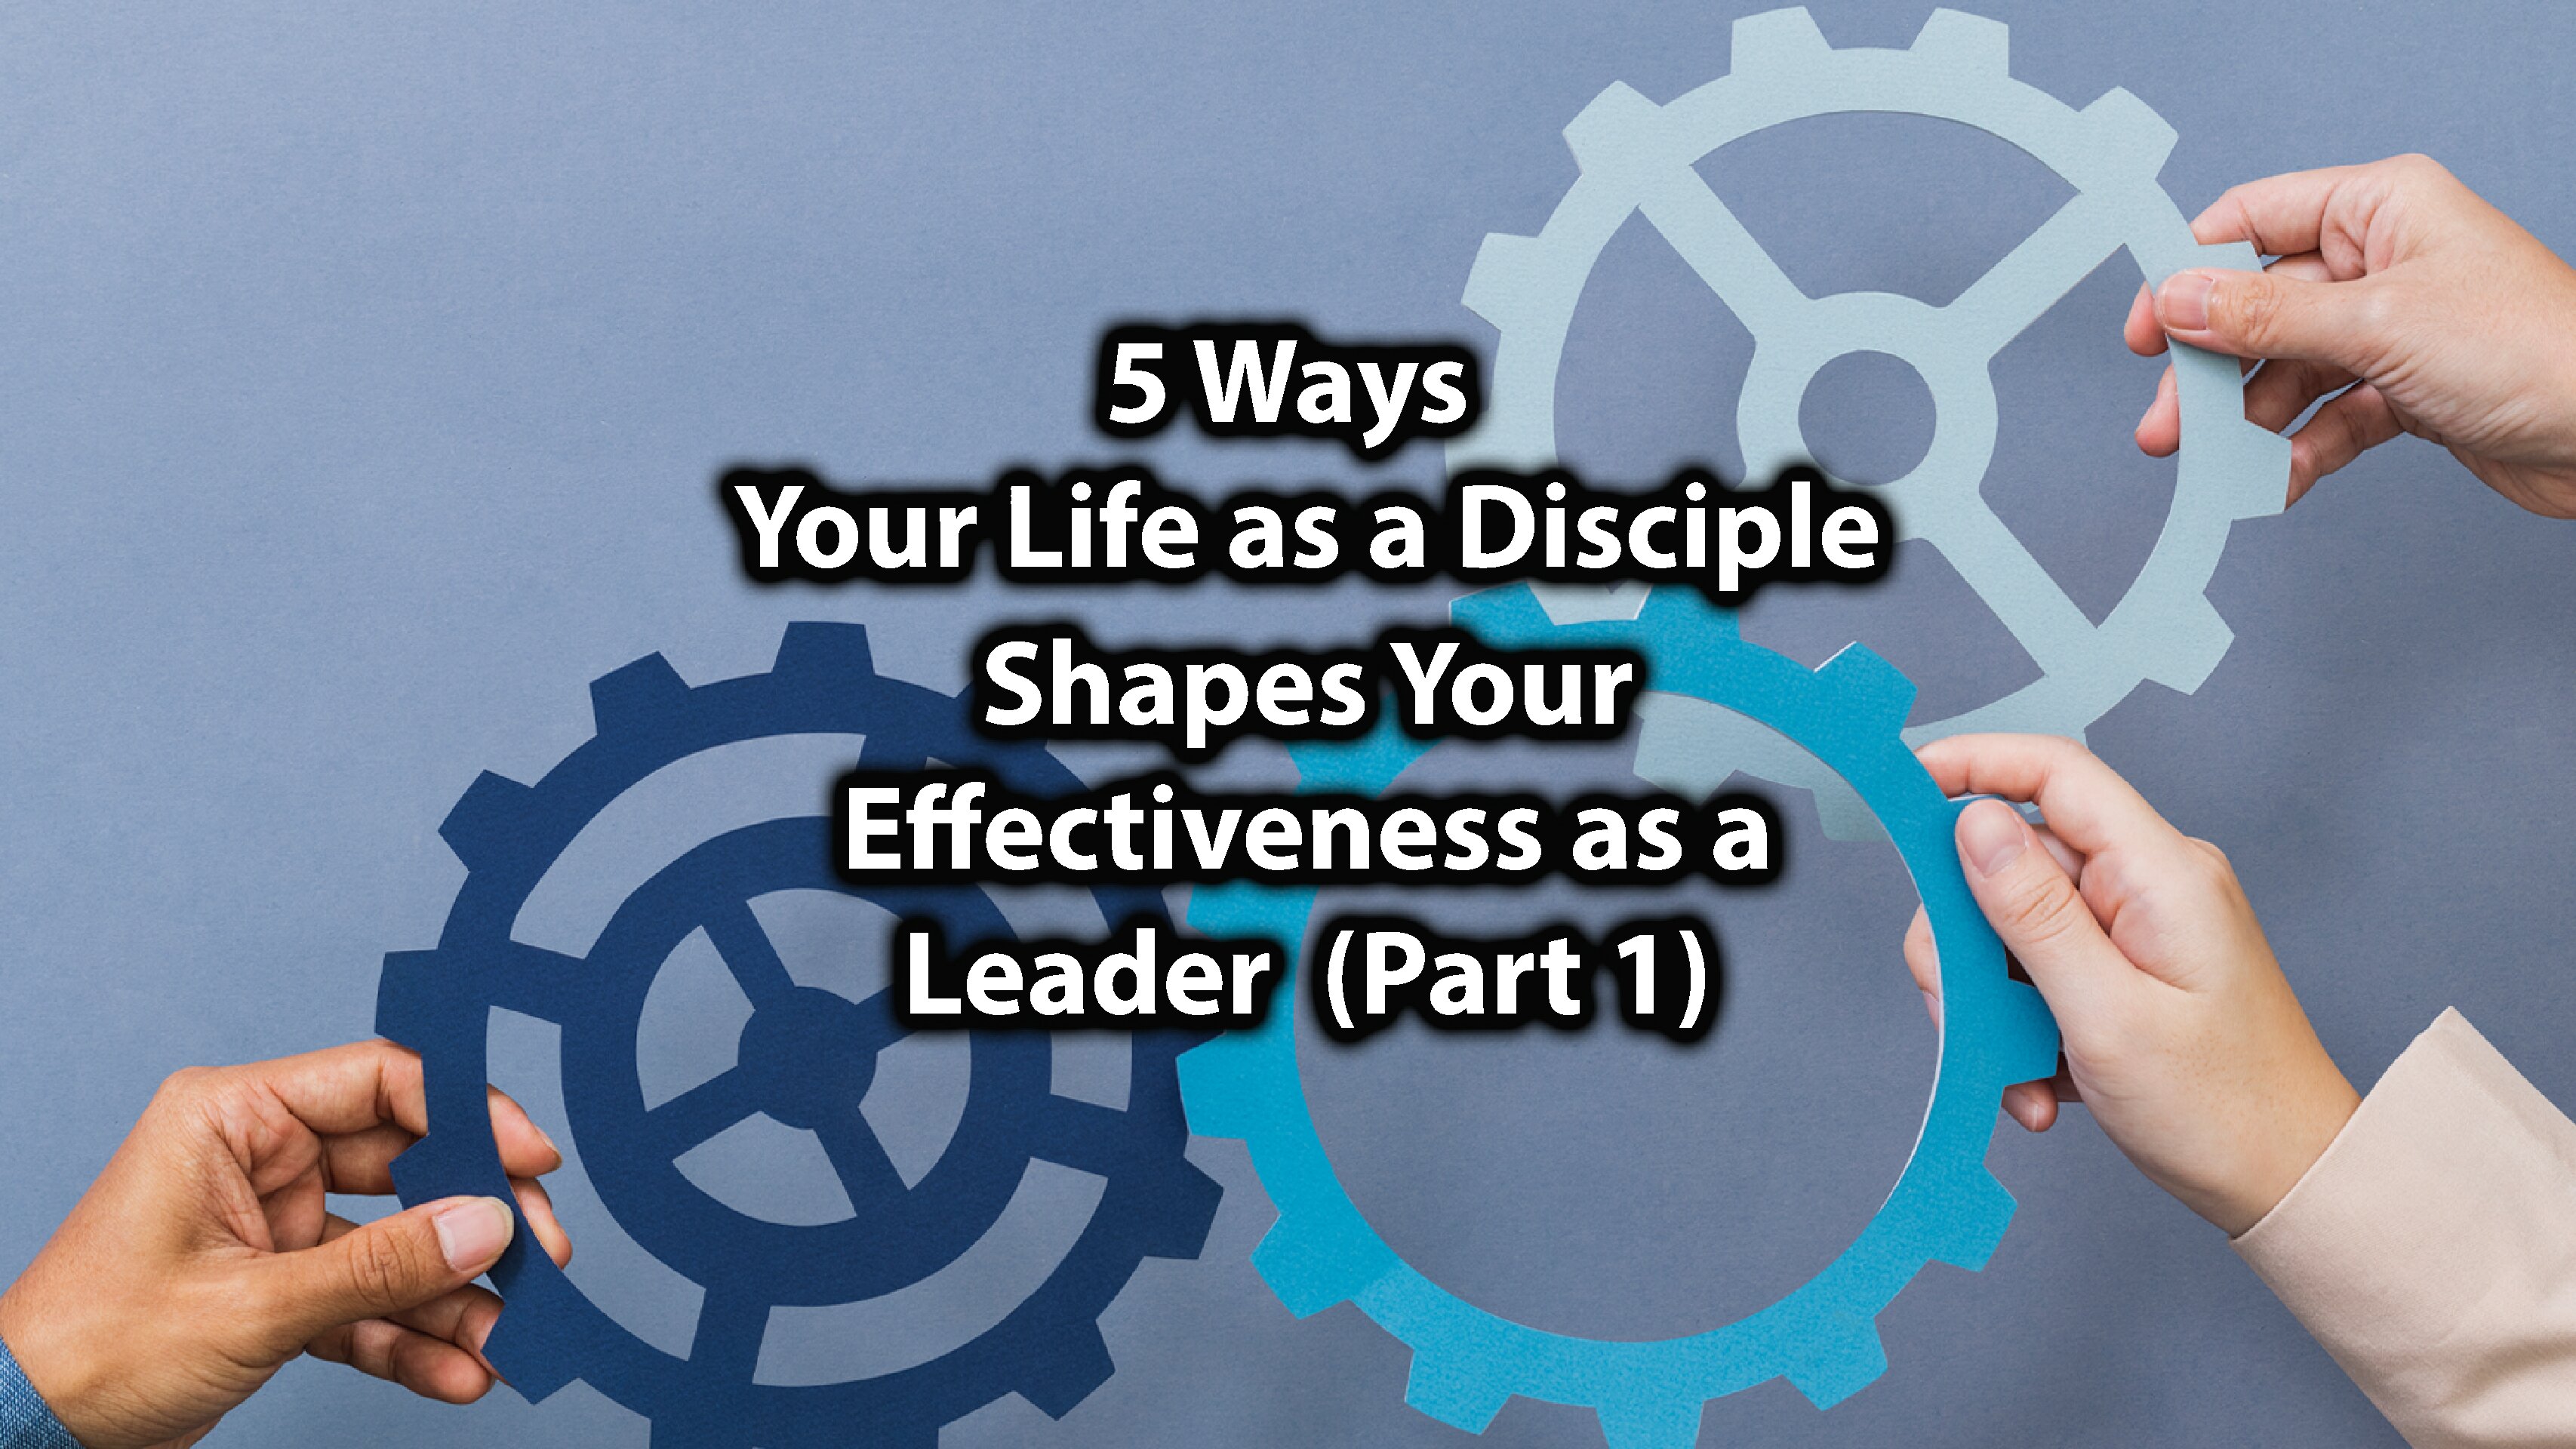 5 Ways Your Life as a Disciple Shapes Your Effectiveness as A Leader (Part 1)